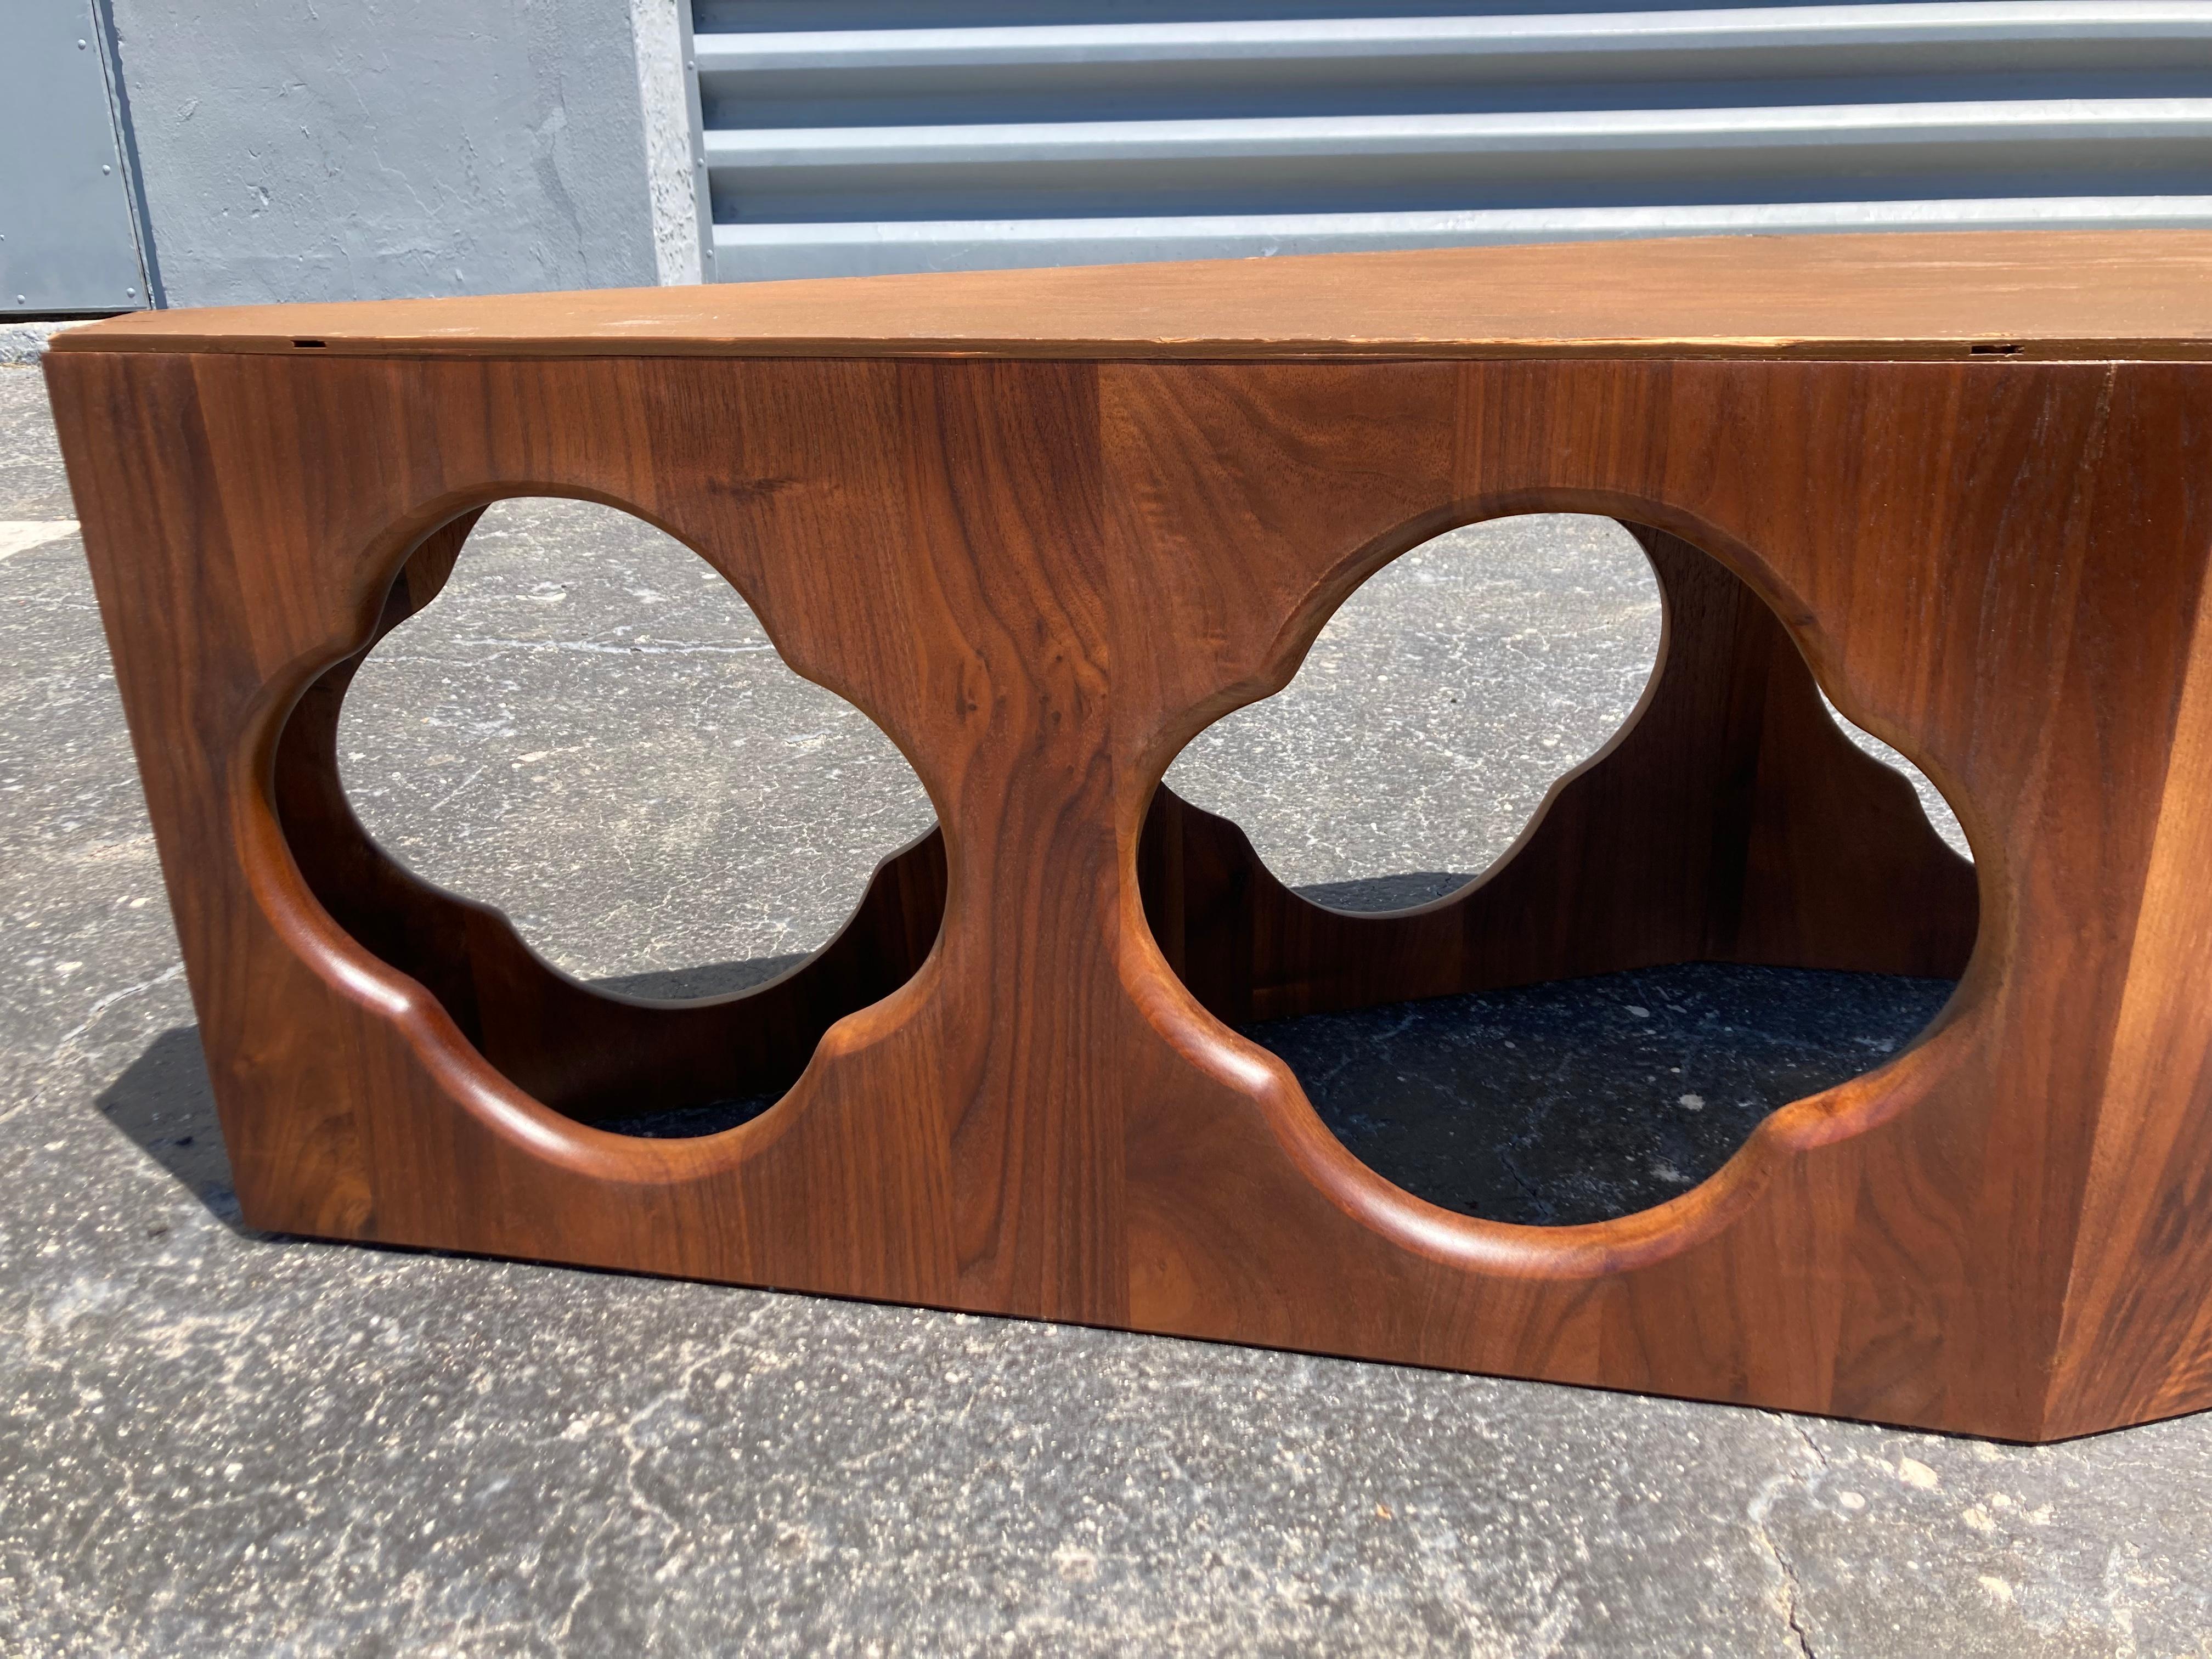 Stunning Walnut and Marble Coffee Table, USA 1950s For Sale 14